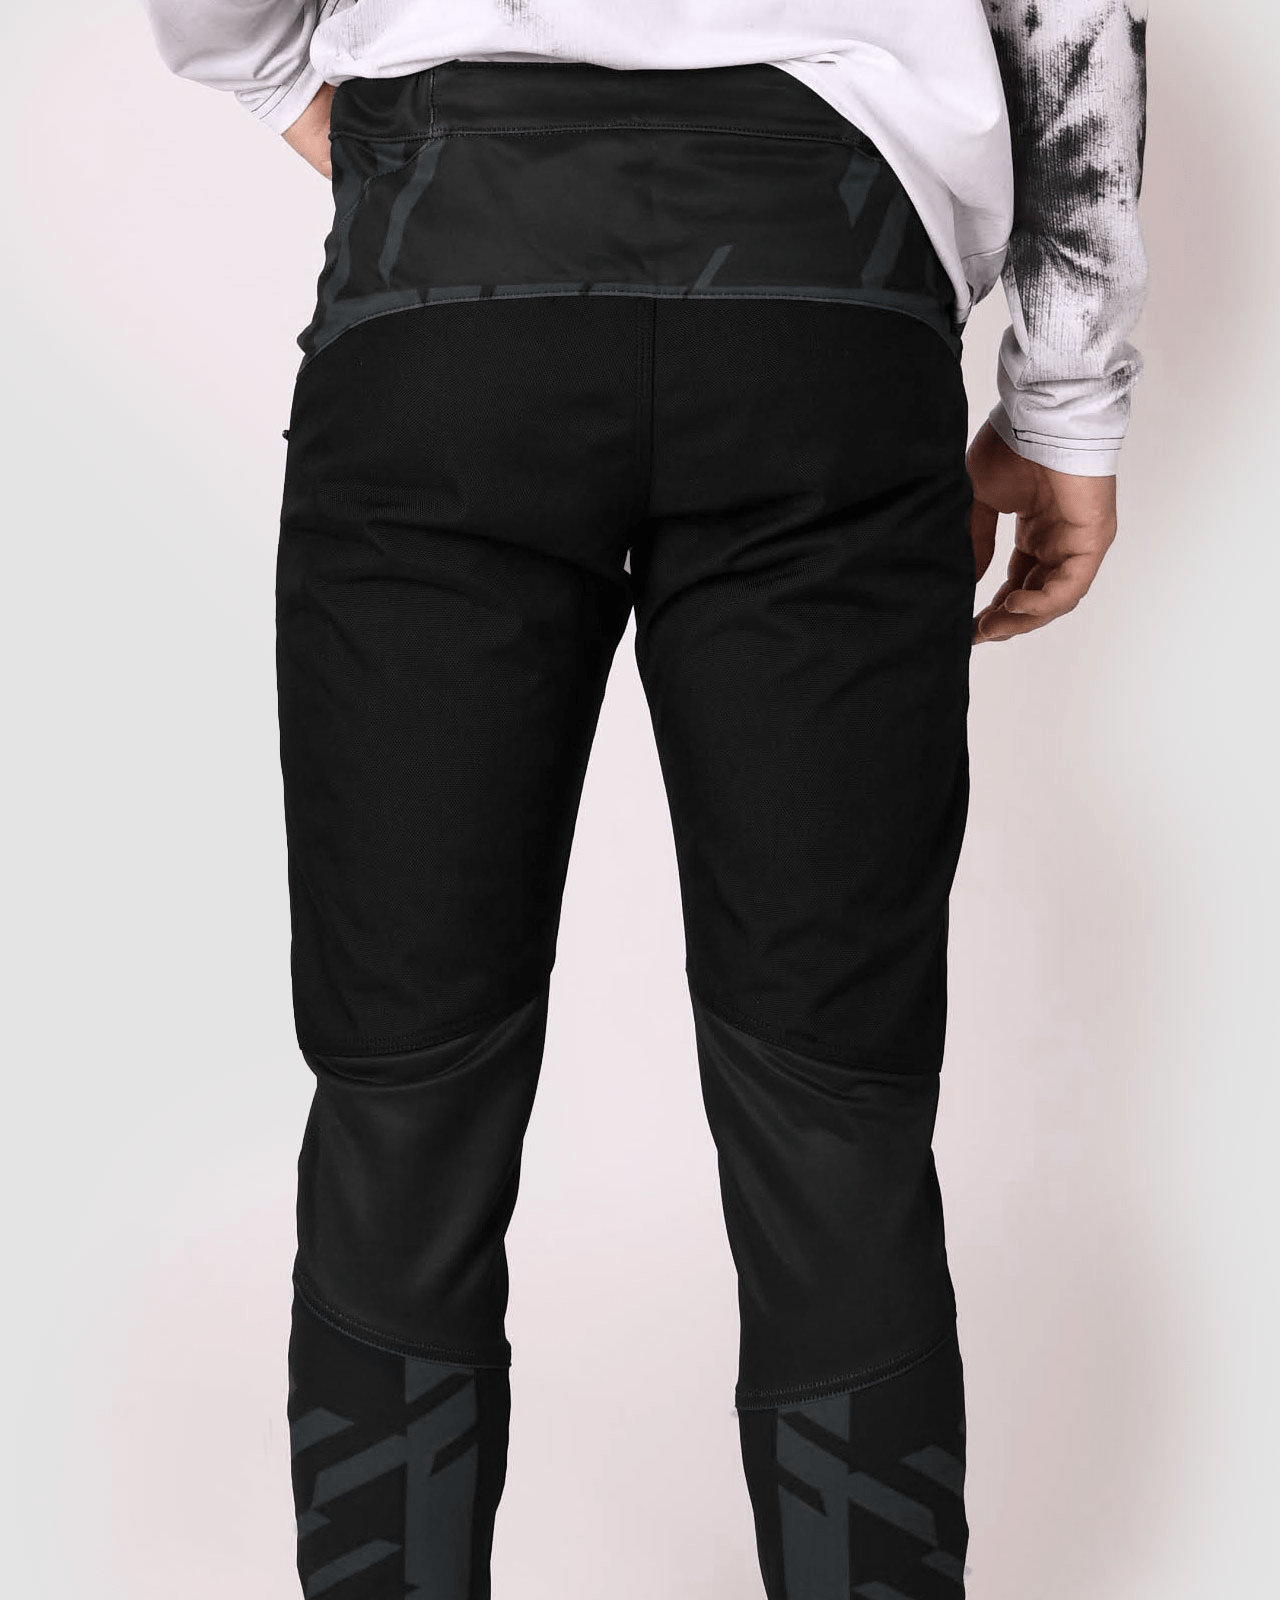 Manufactory Apparel Physical product Electrix Streamline Pant